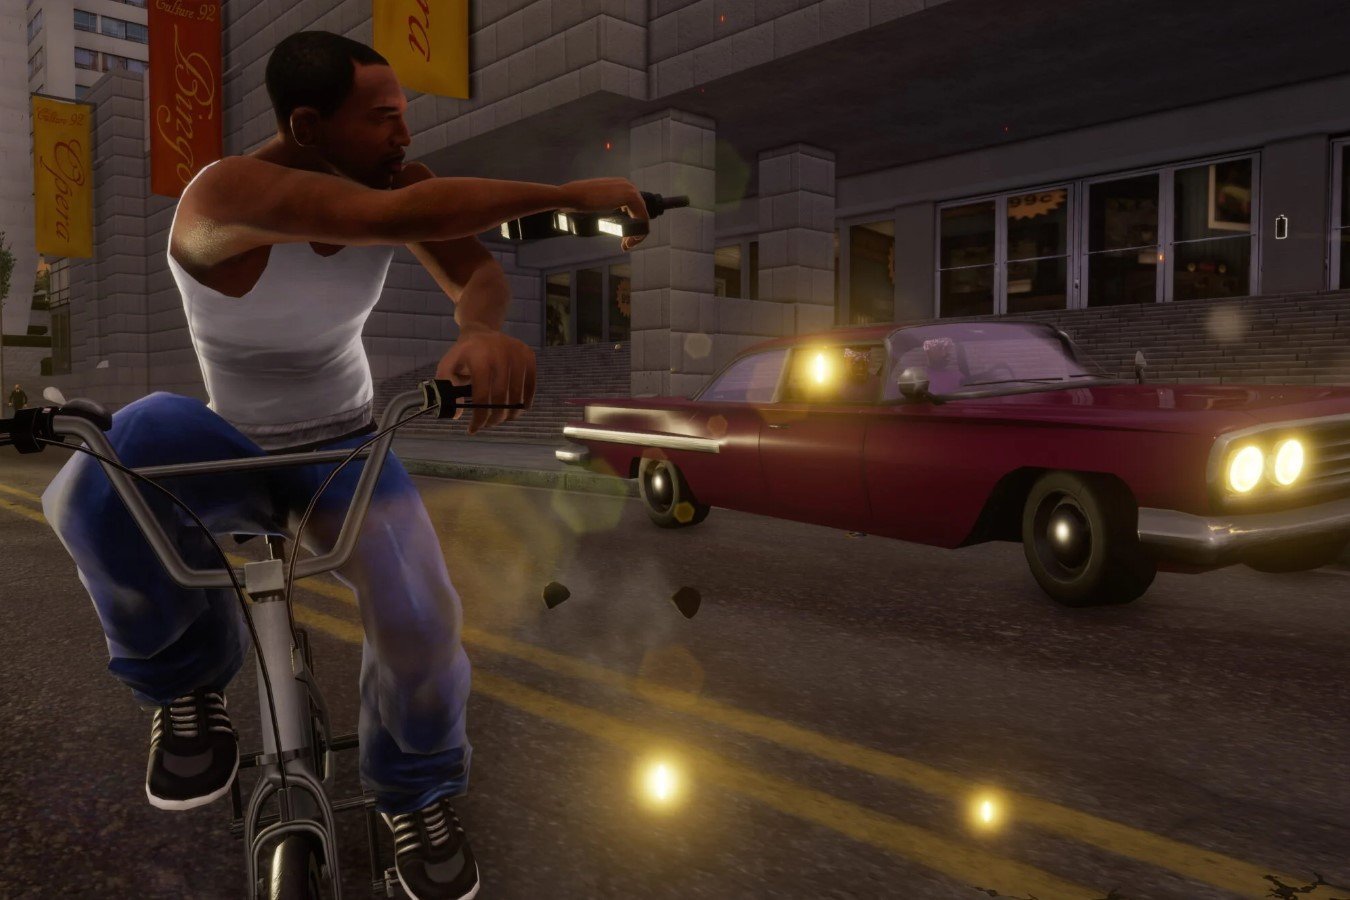 Game reviewers have compared the remasters of the classic GTA trilogy with the originals